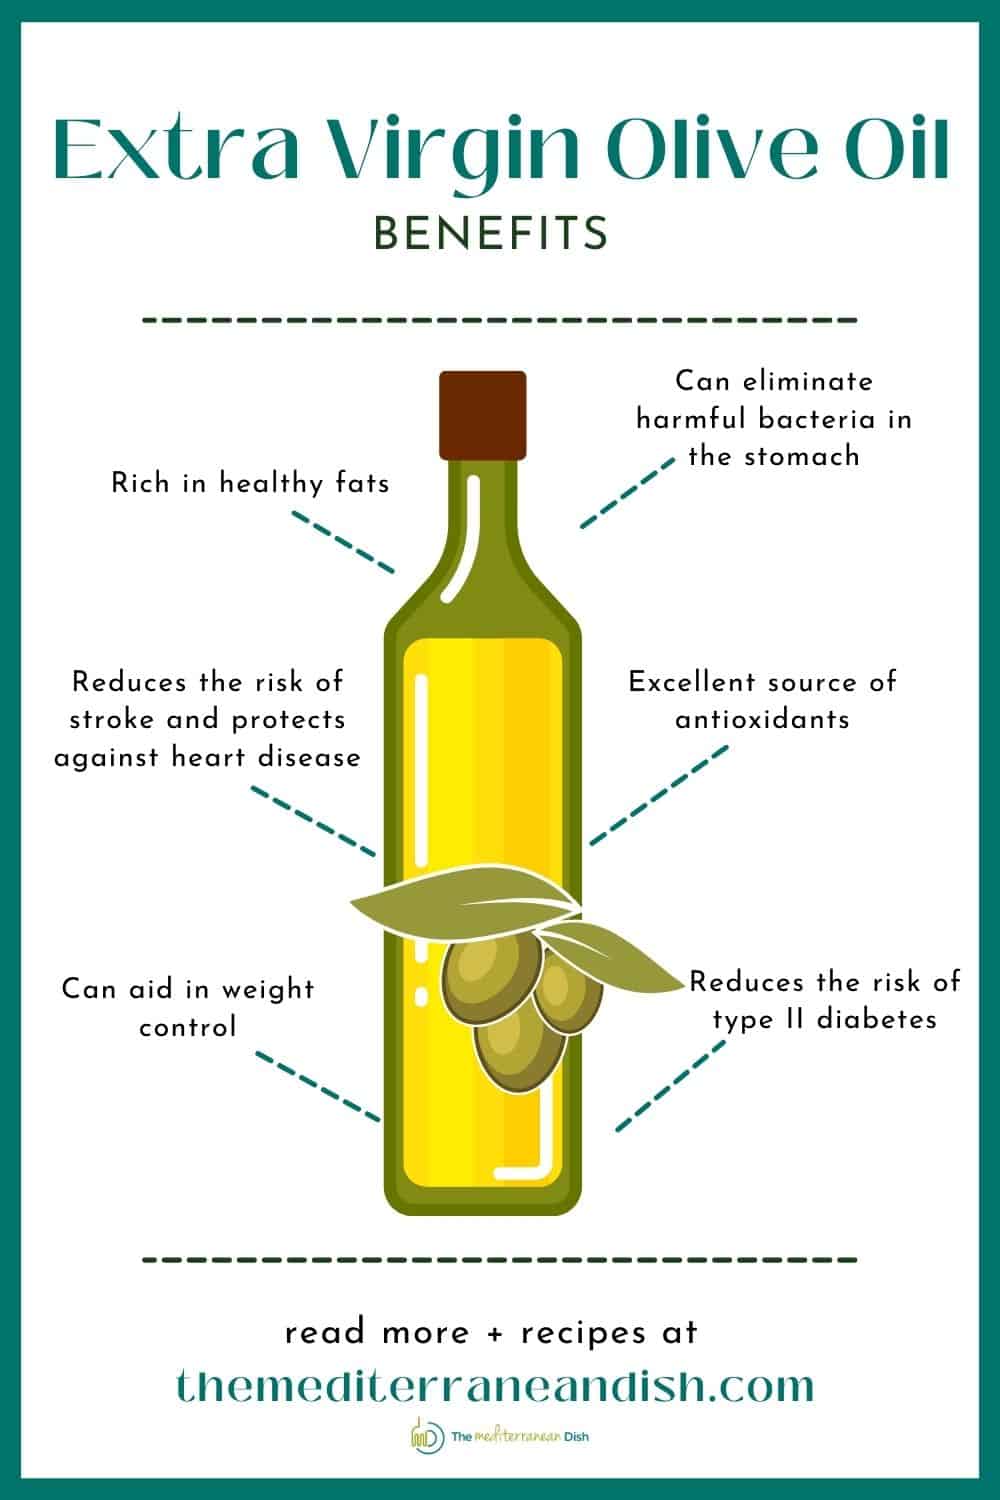 Olive Oil 101: Everything You Need to Know - The Mediterranean Dish